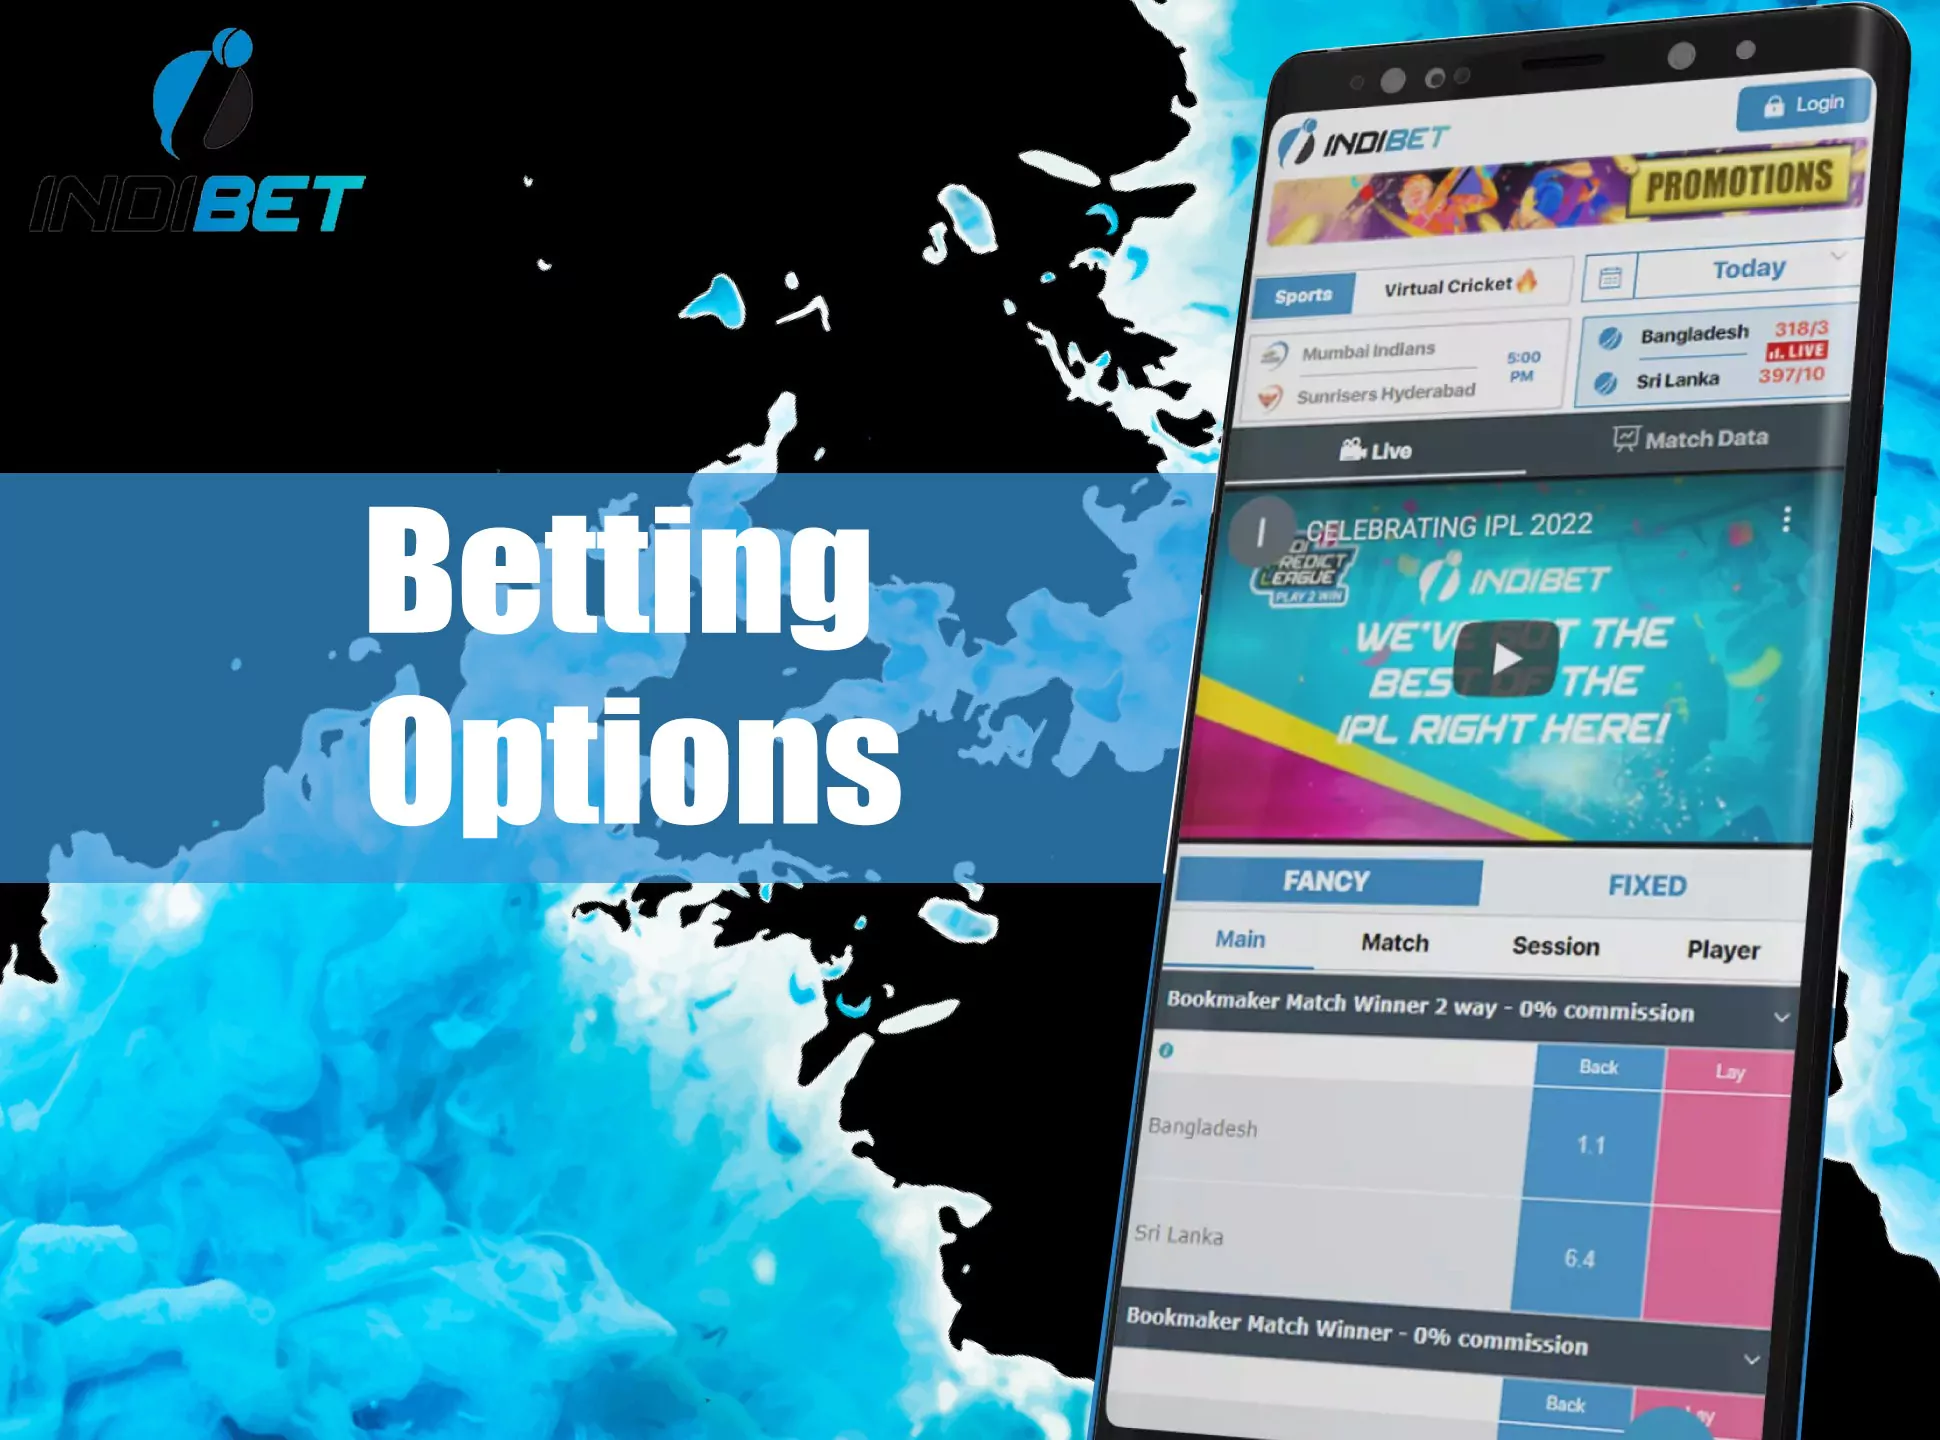 Bet differently with Indibet app.